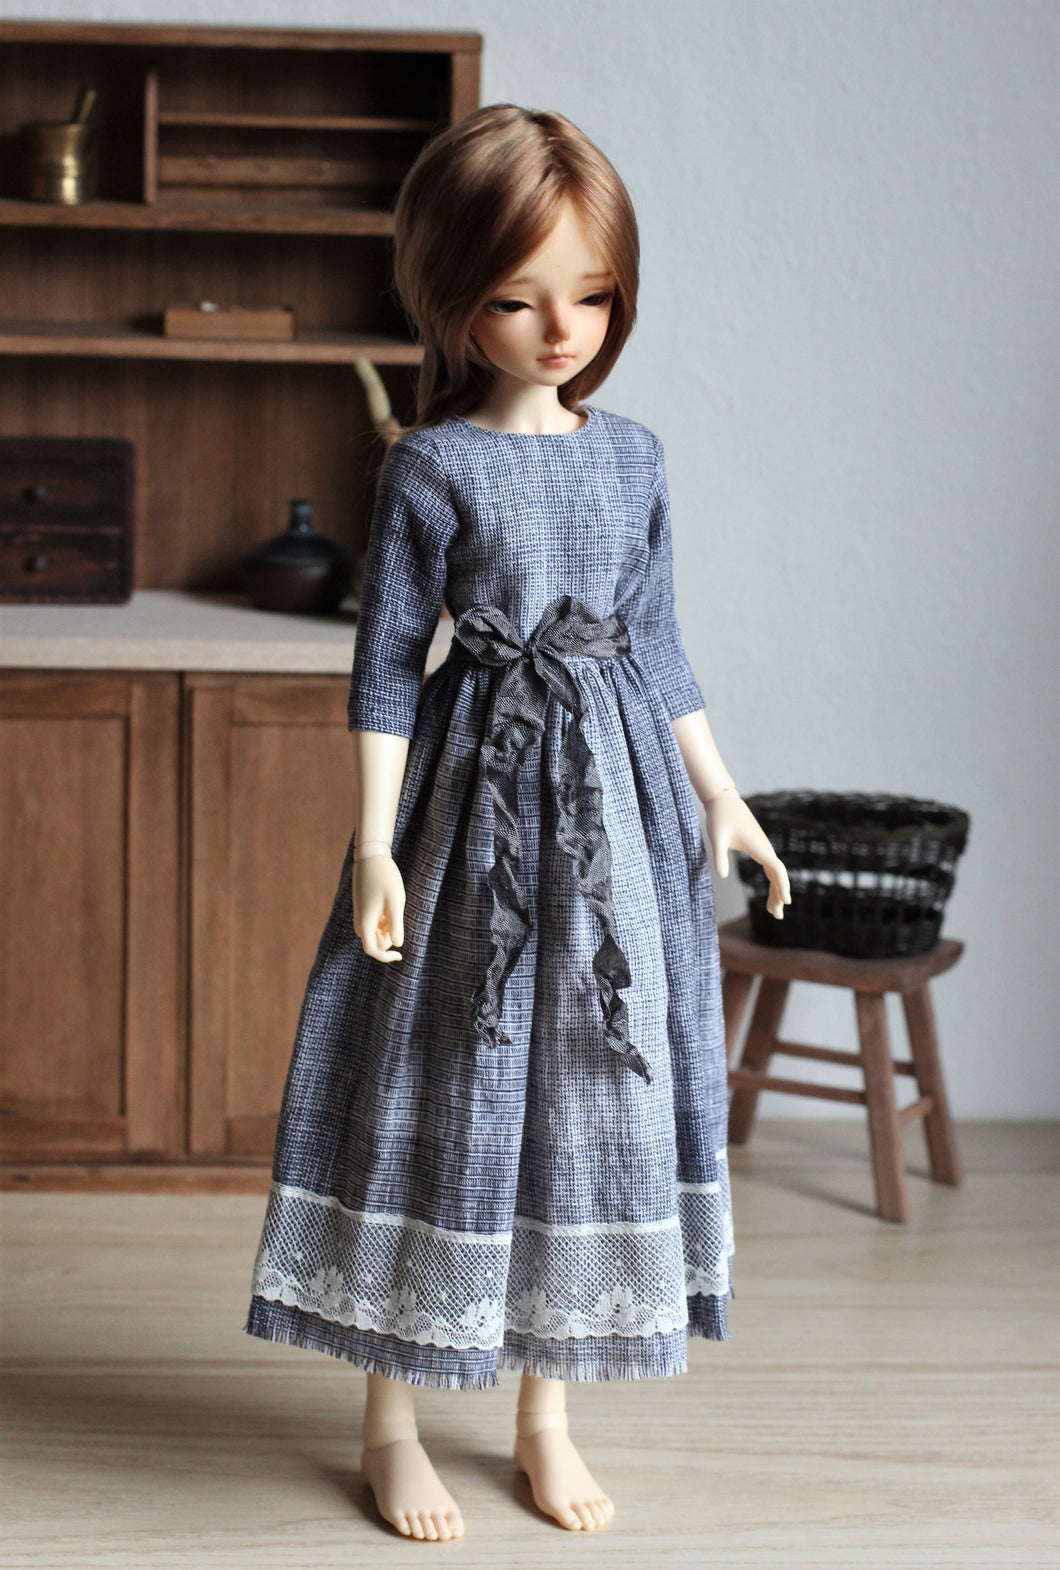 Loose fitted blue dress.